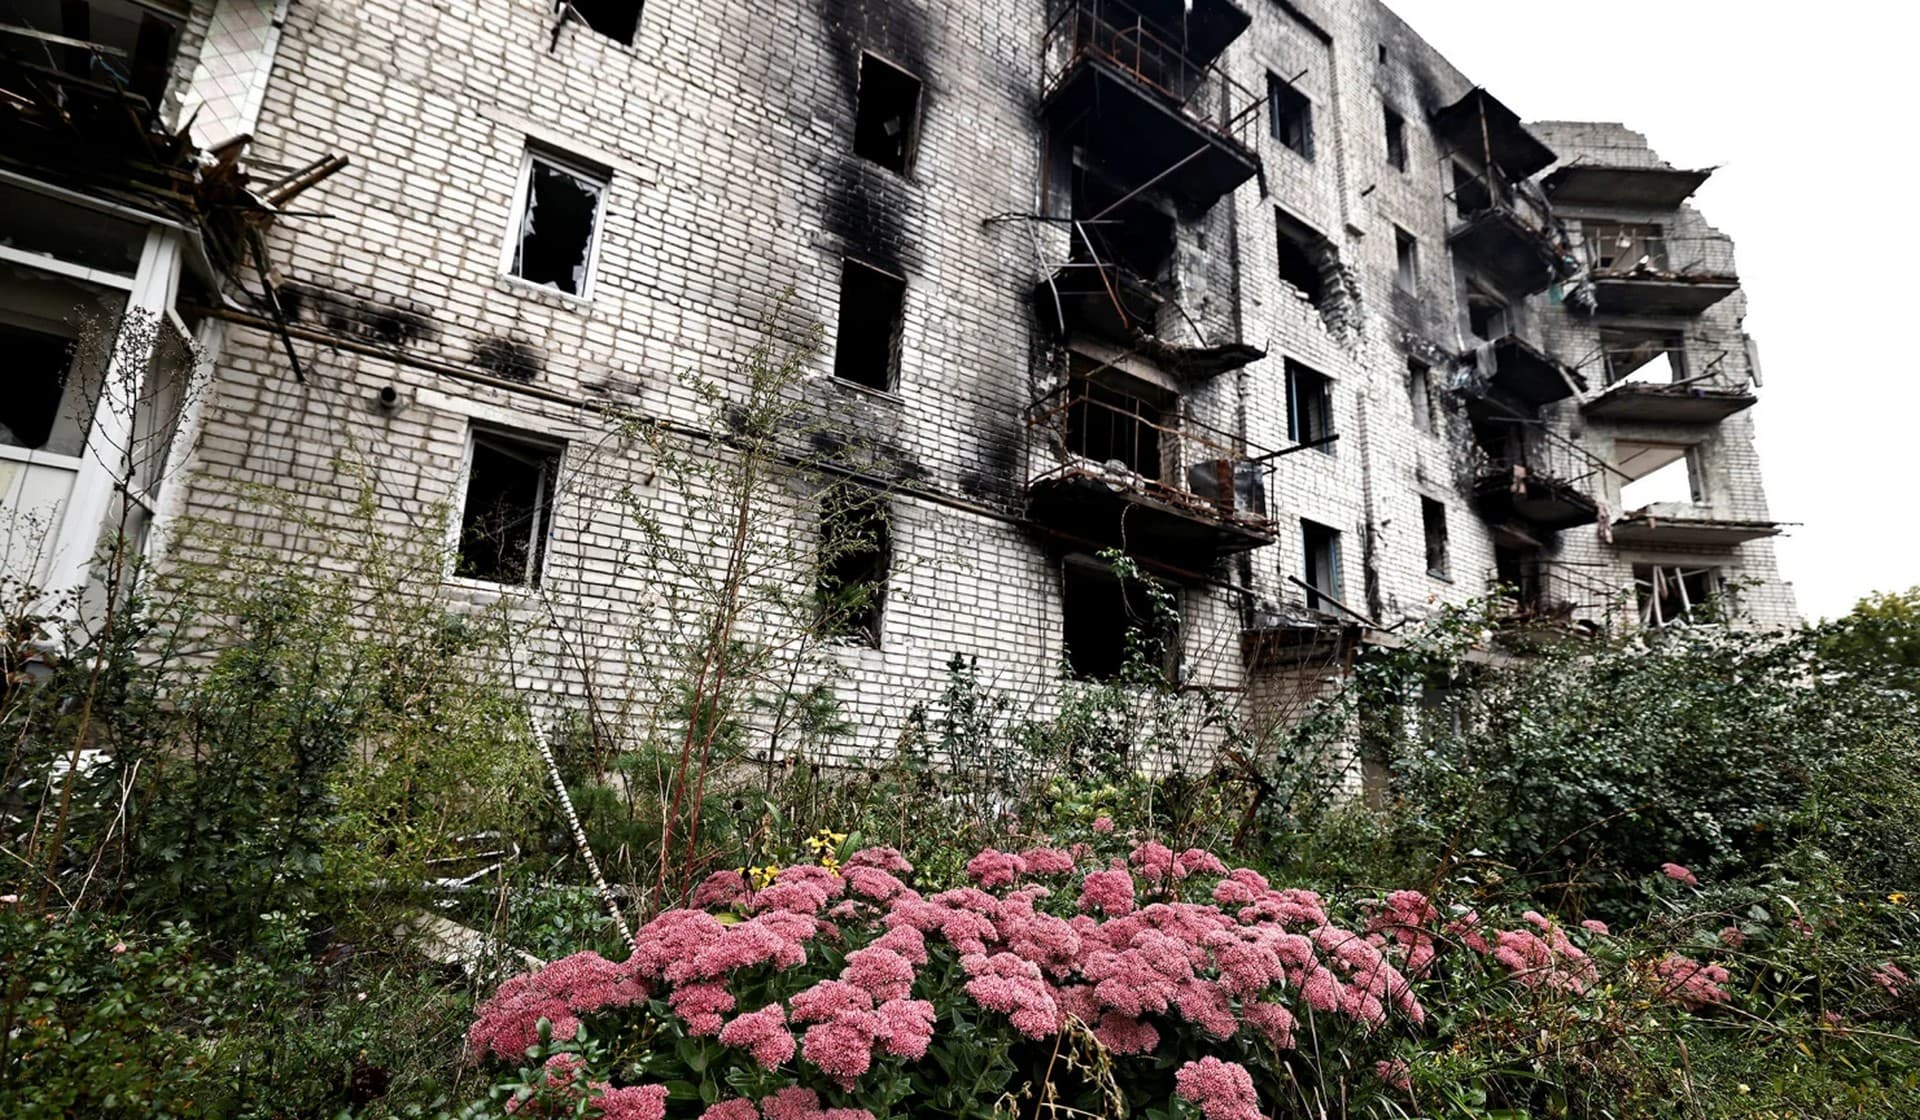 Flowers beside a destroyed building in the recently liberated town of Izium